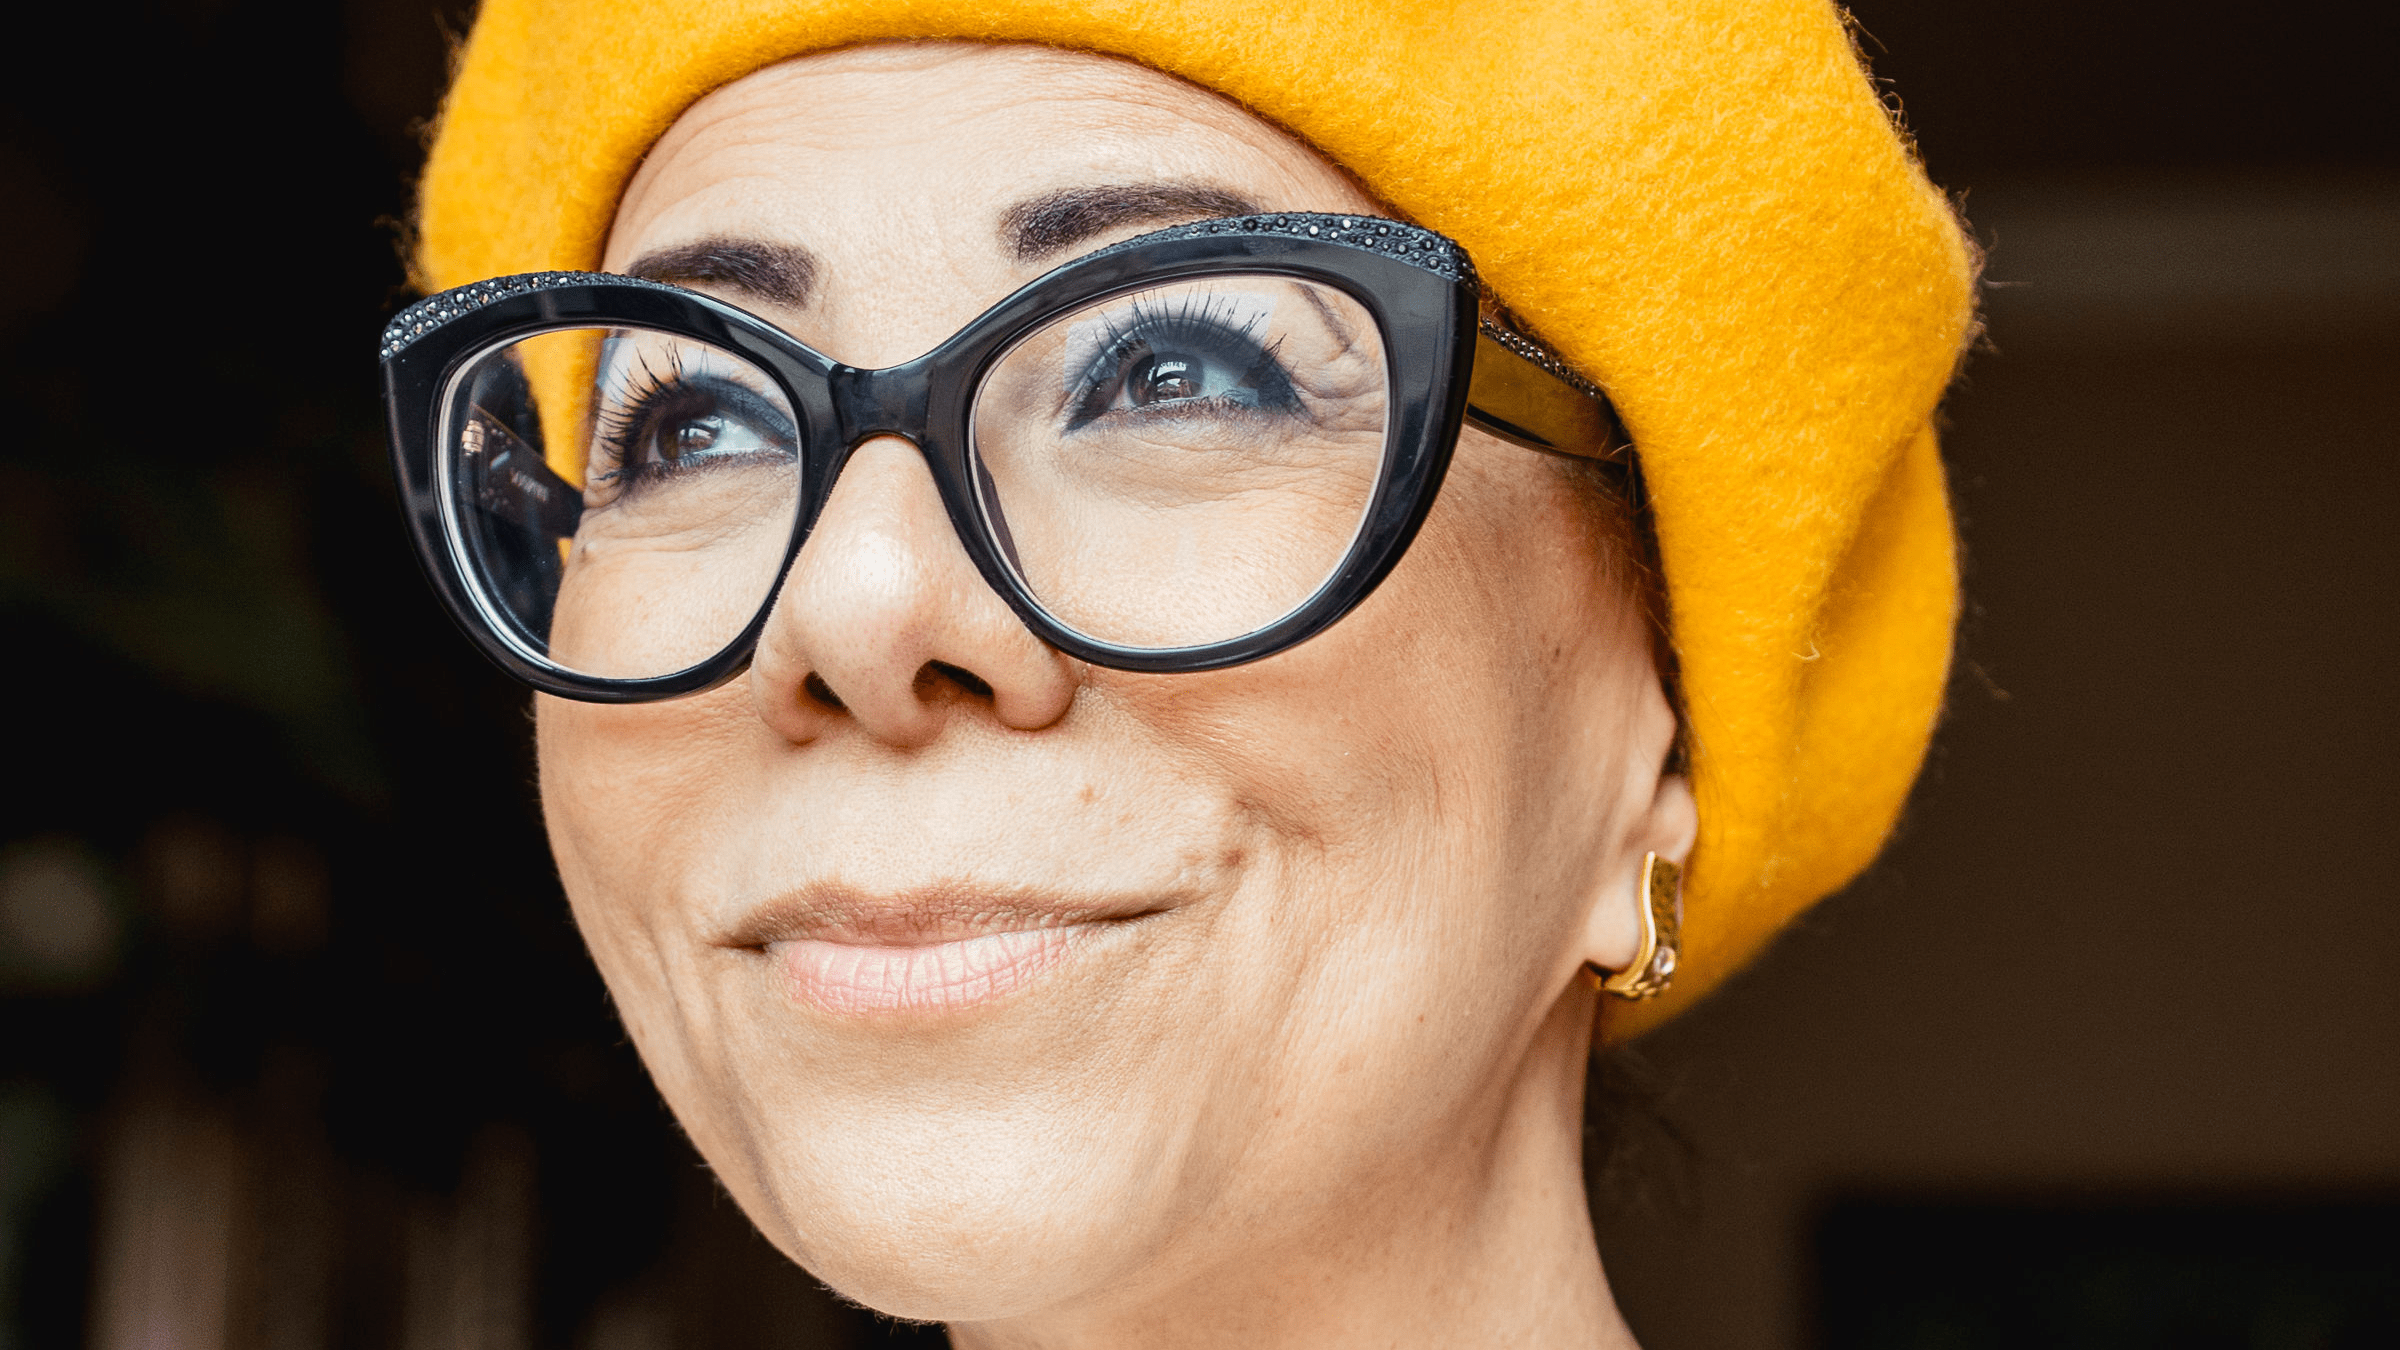 A middle aged woman wearing glasses and a yellow hat looks into the distance.